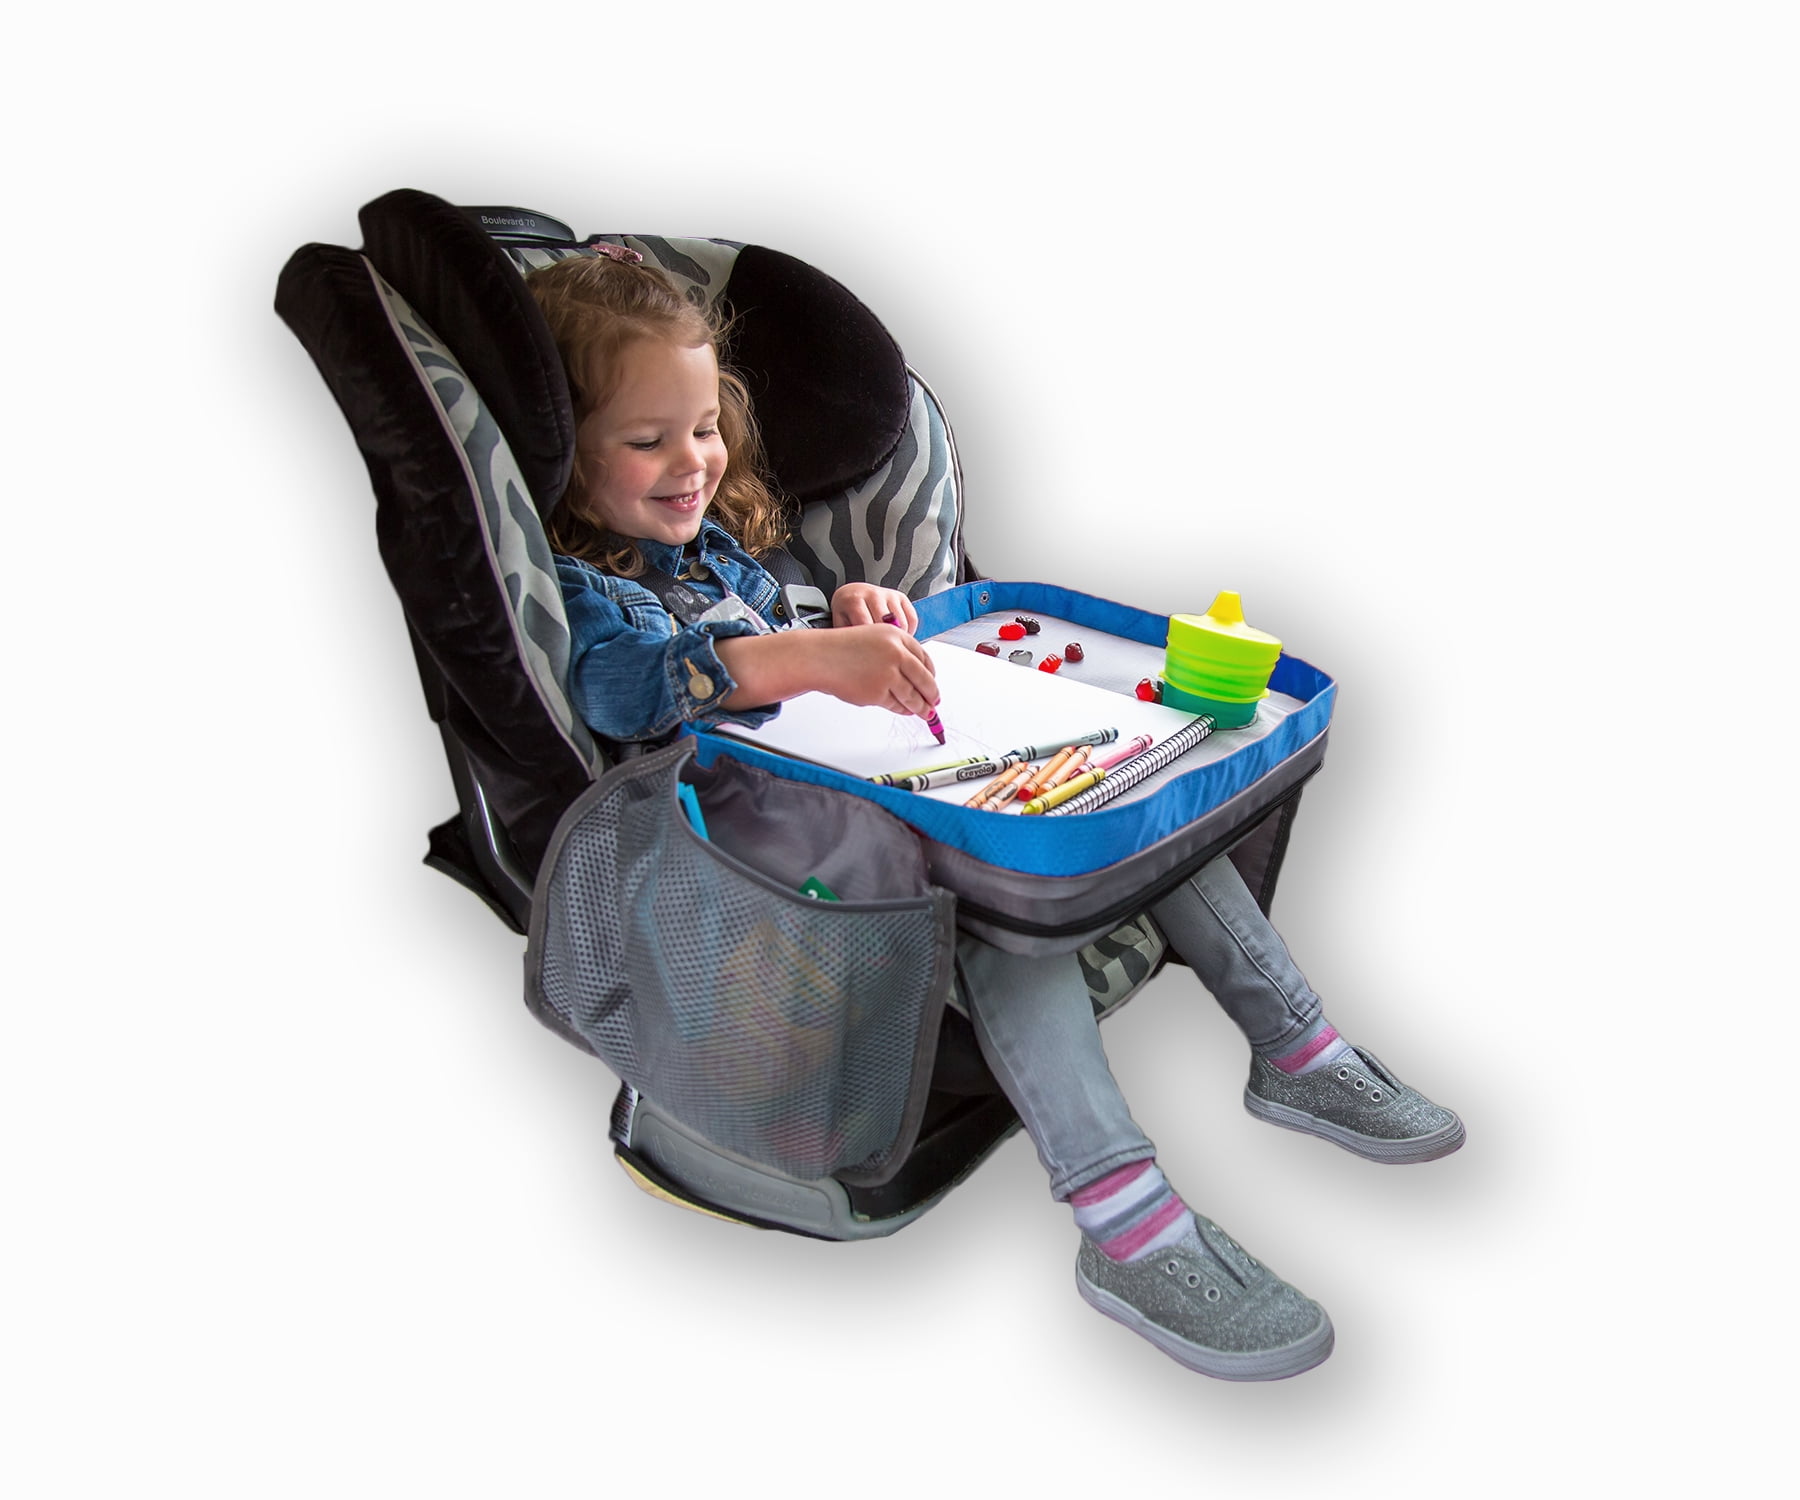 Travel Tray Activity Center for Kids 4-in-1 Car Seat Organizer with Lap Desk 